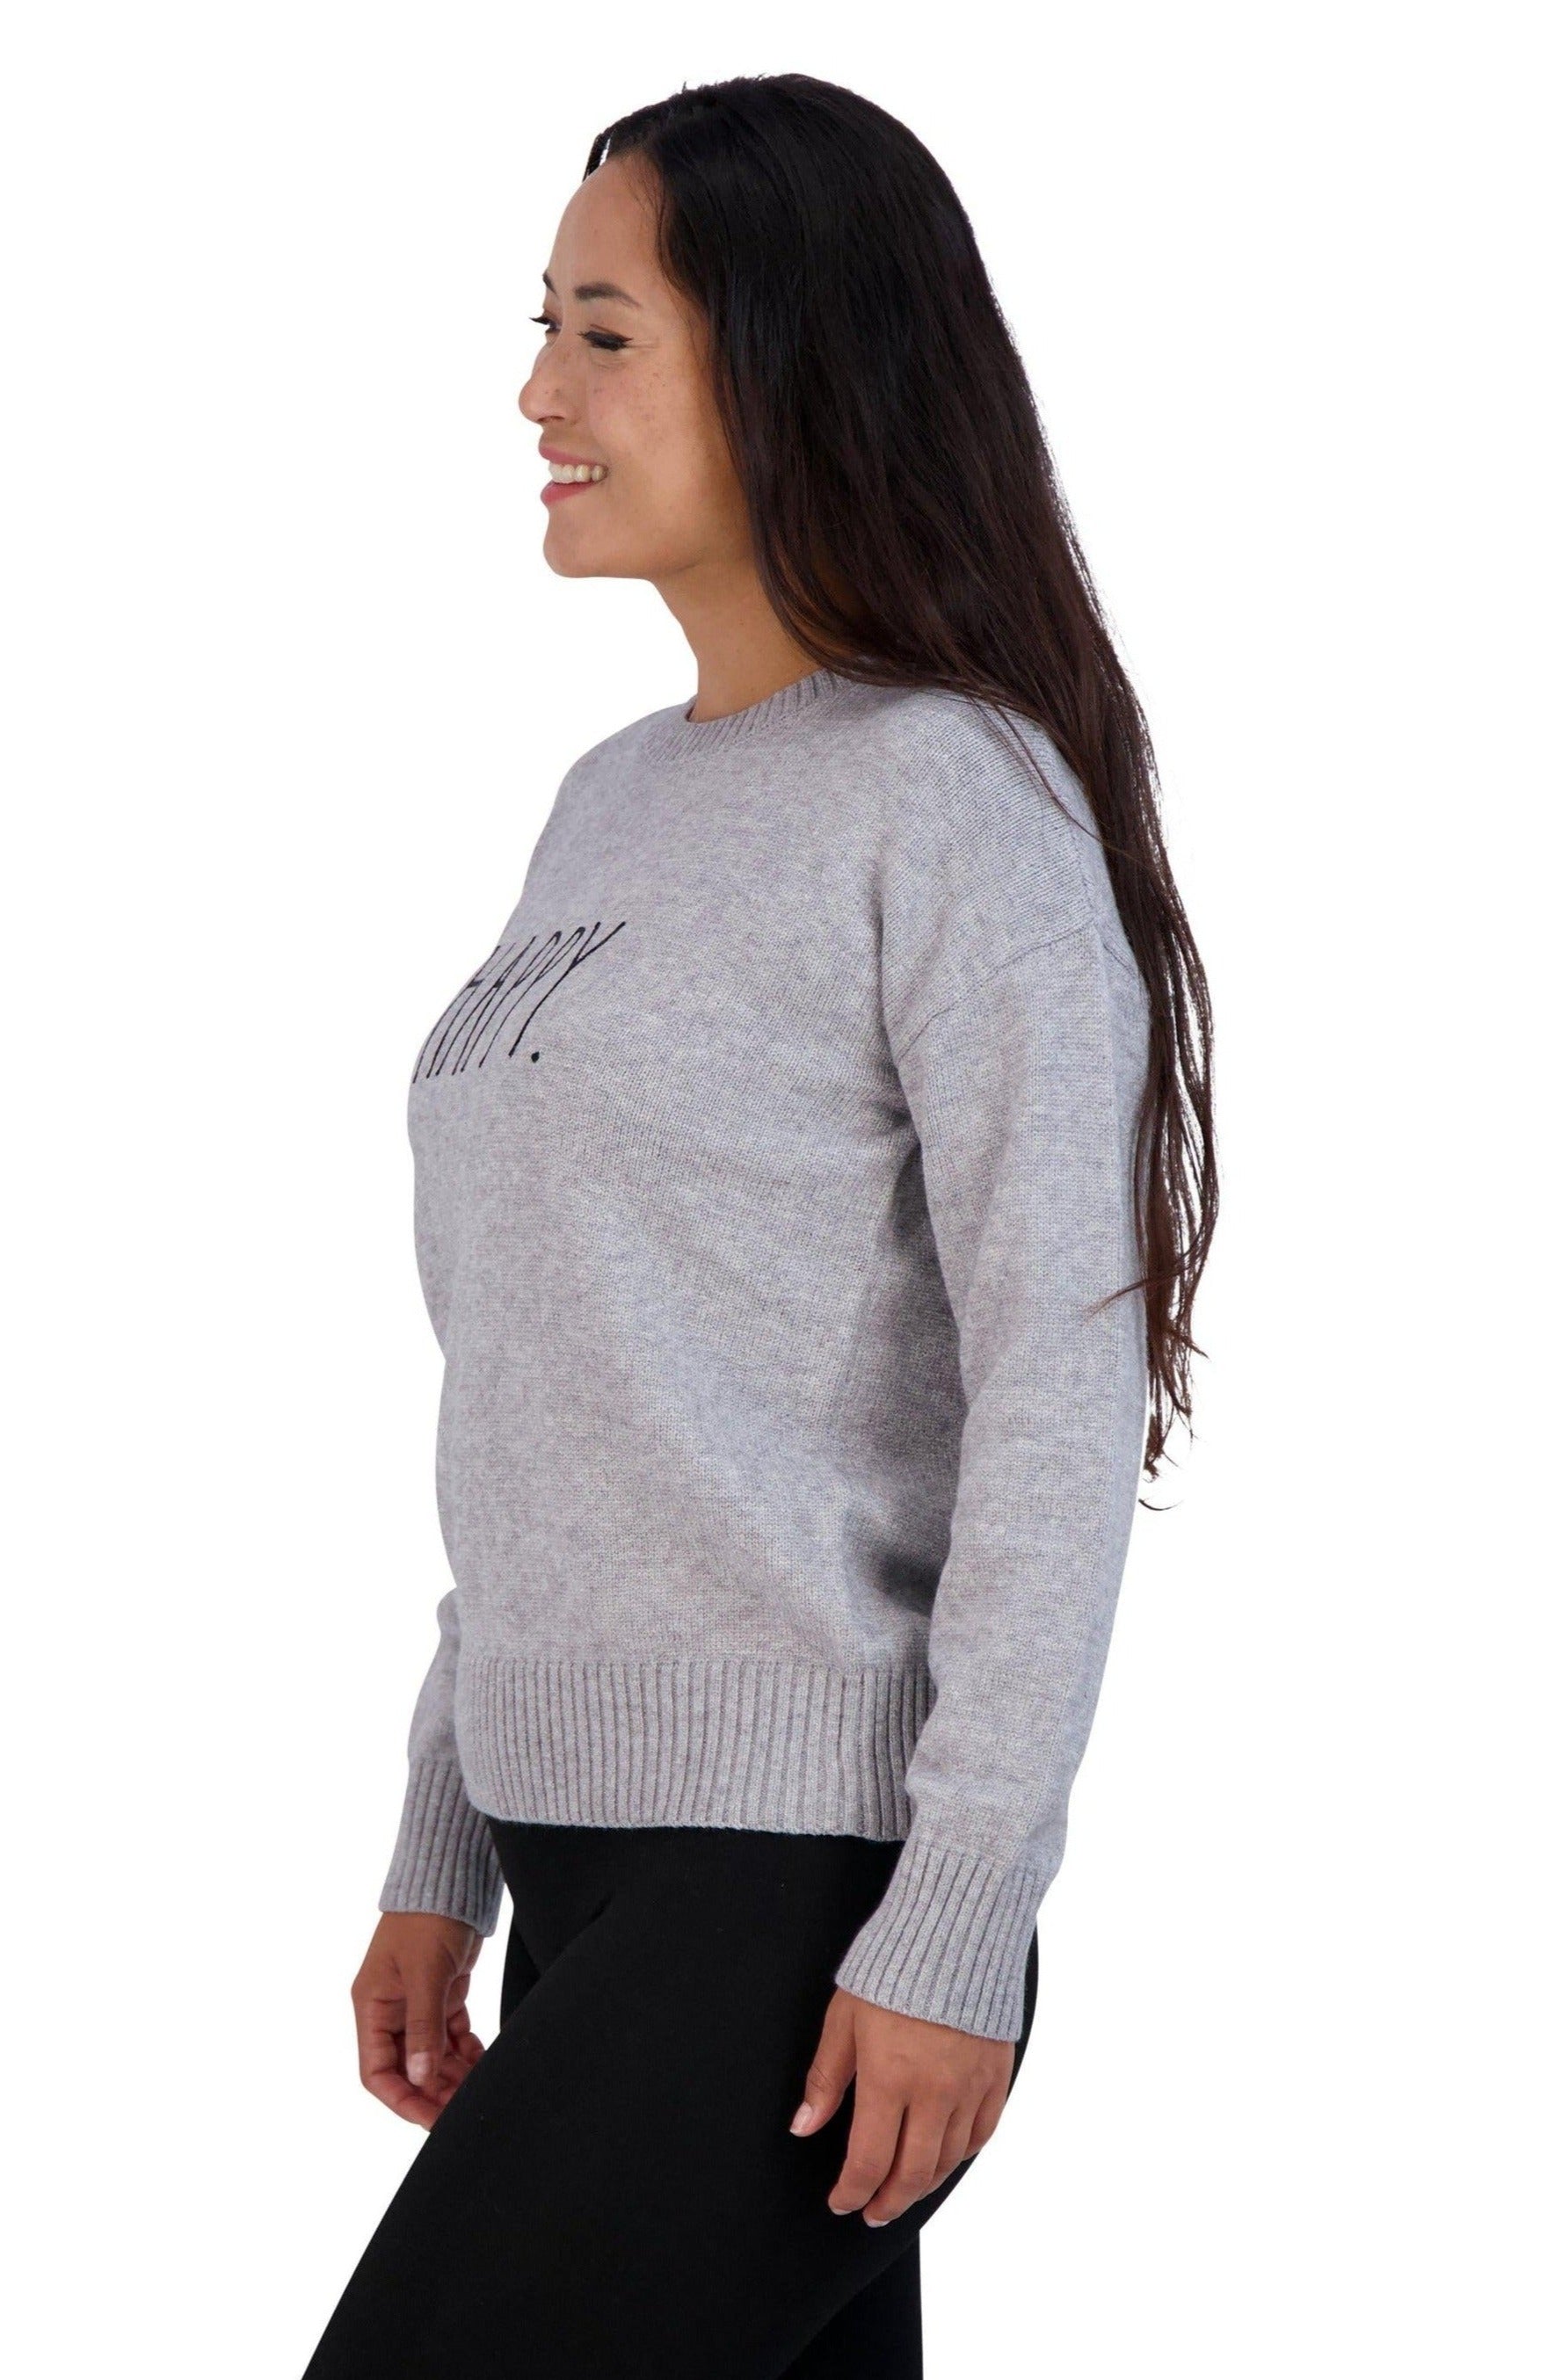 Women's Embroidered "HAPPY" Knit Gray Sweater - Rae Dunn Wear